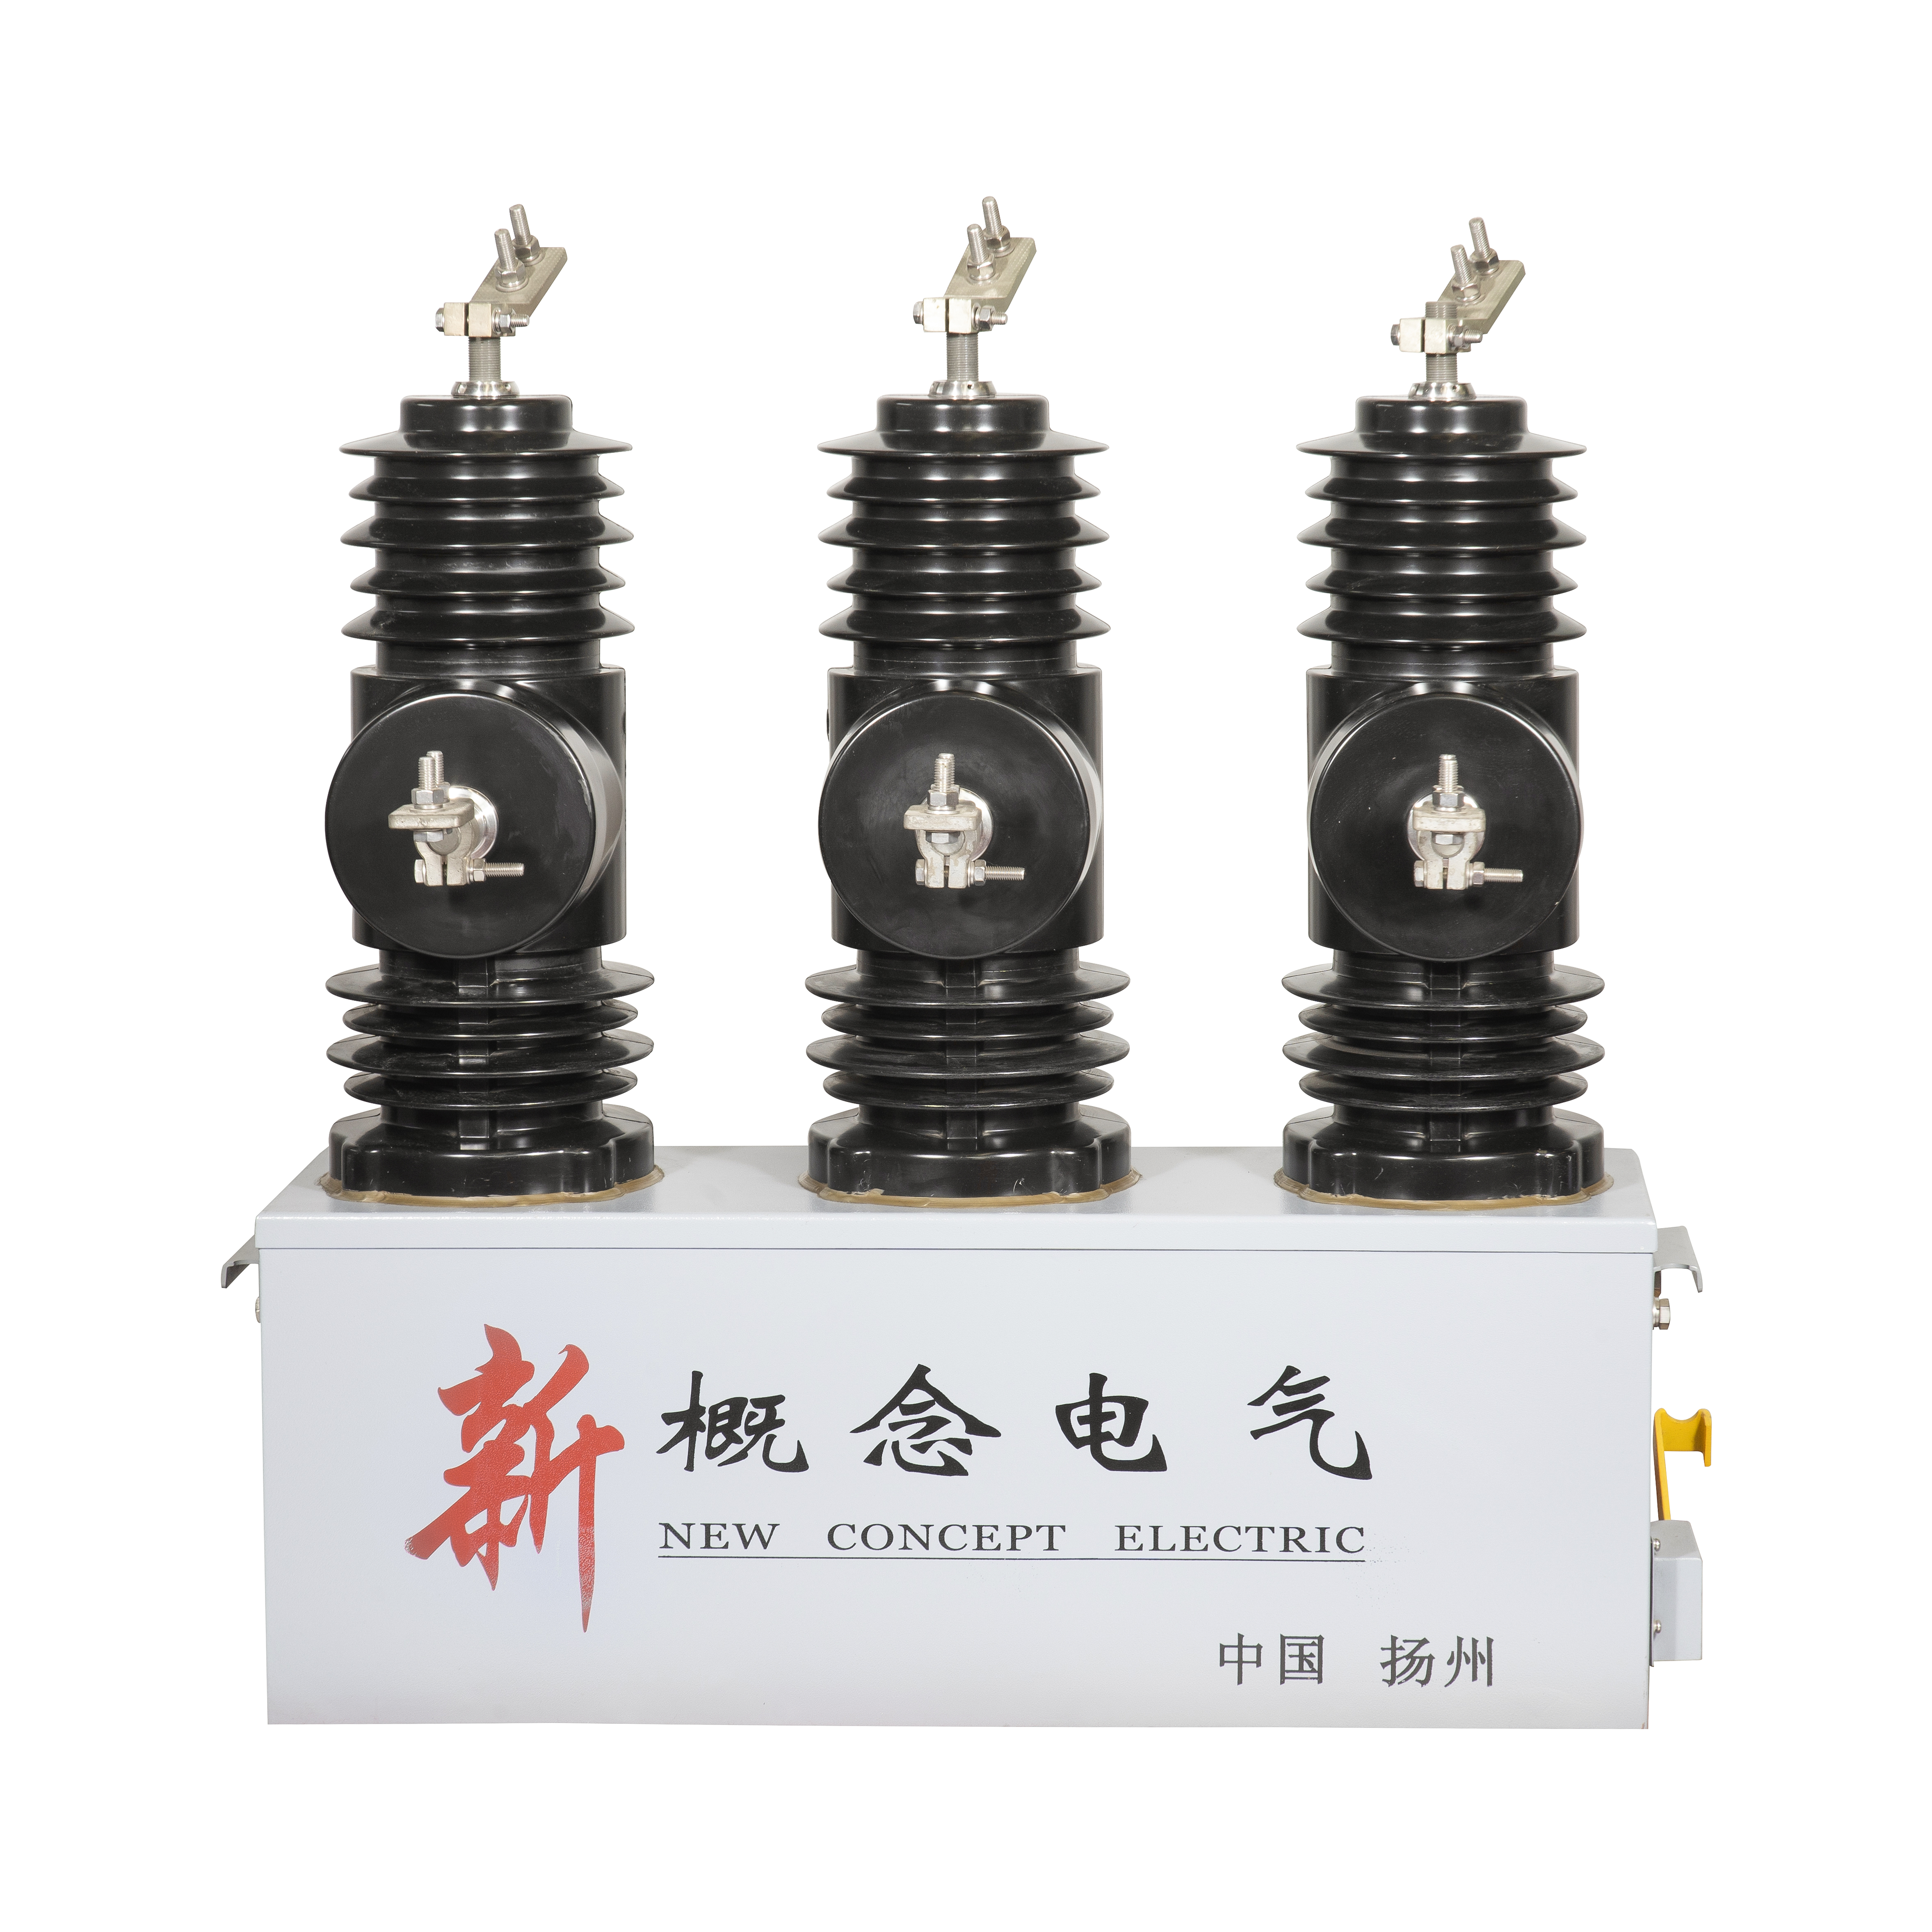 AR-3S-12 11kV 12kV Outdoor Pole Mounted Intelligent Medium Voltage Permanent Magnetic Actuator Automatic Circuit Recloser Auto Recloser with Disconnect Switch